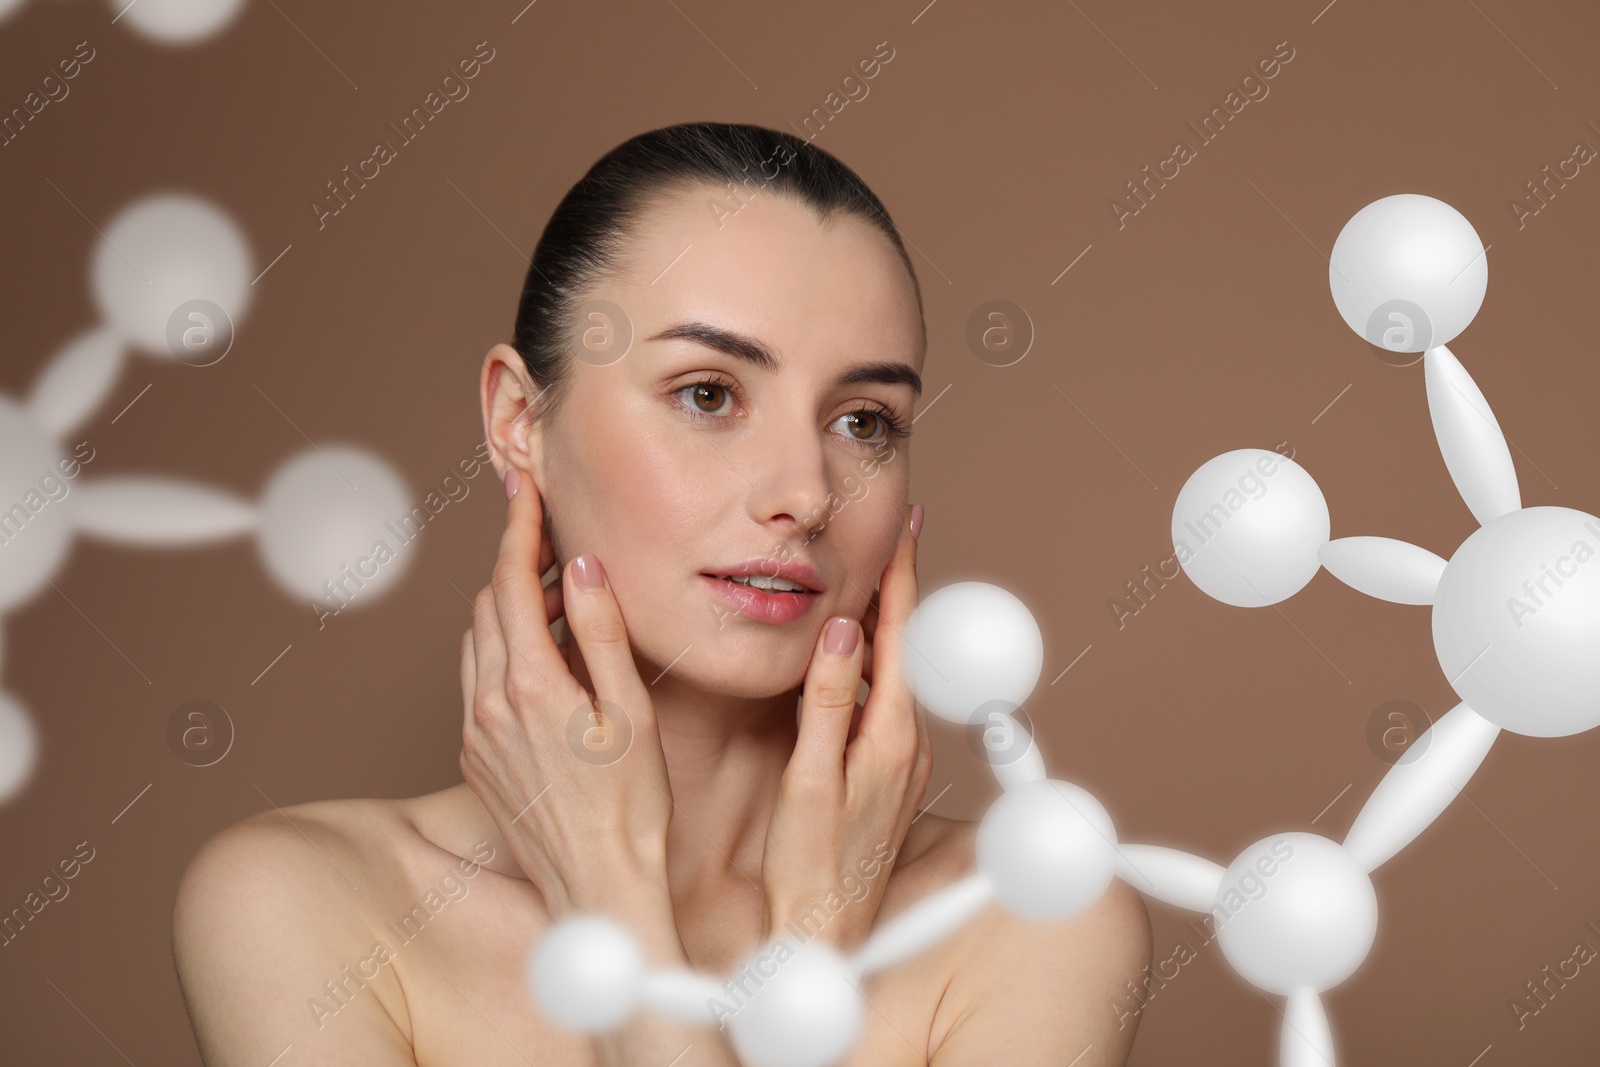 Image of Beautiful woman with perfect healthy skin and molecular model on brown background. Innovative cosmetology